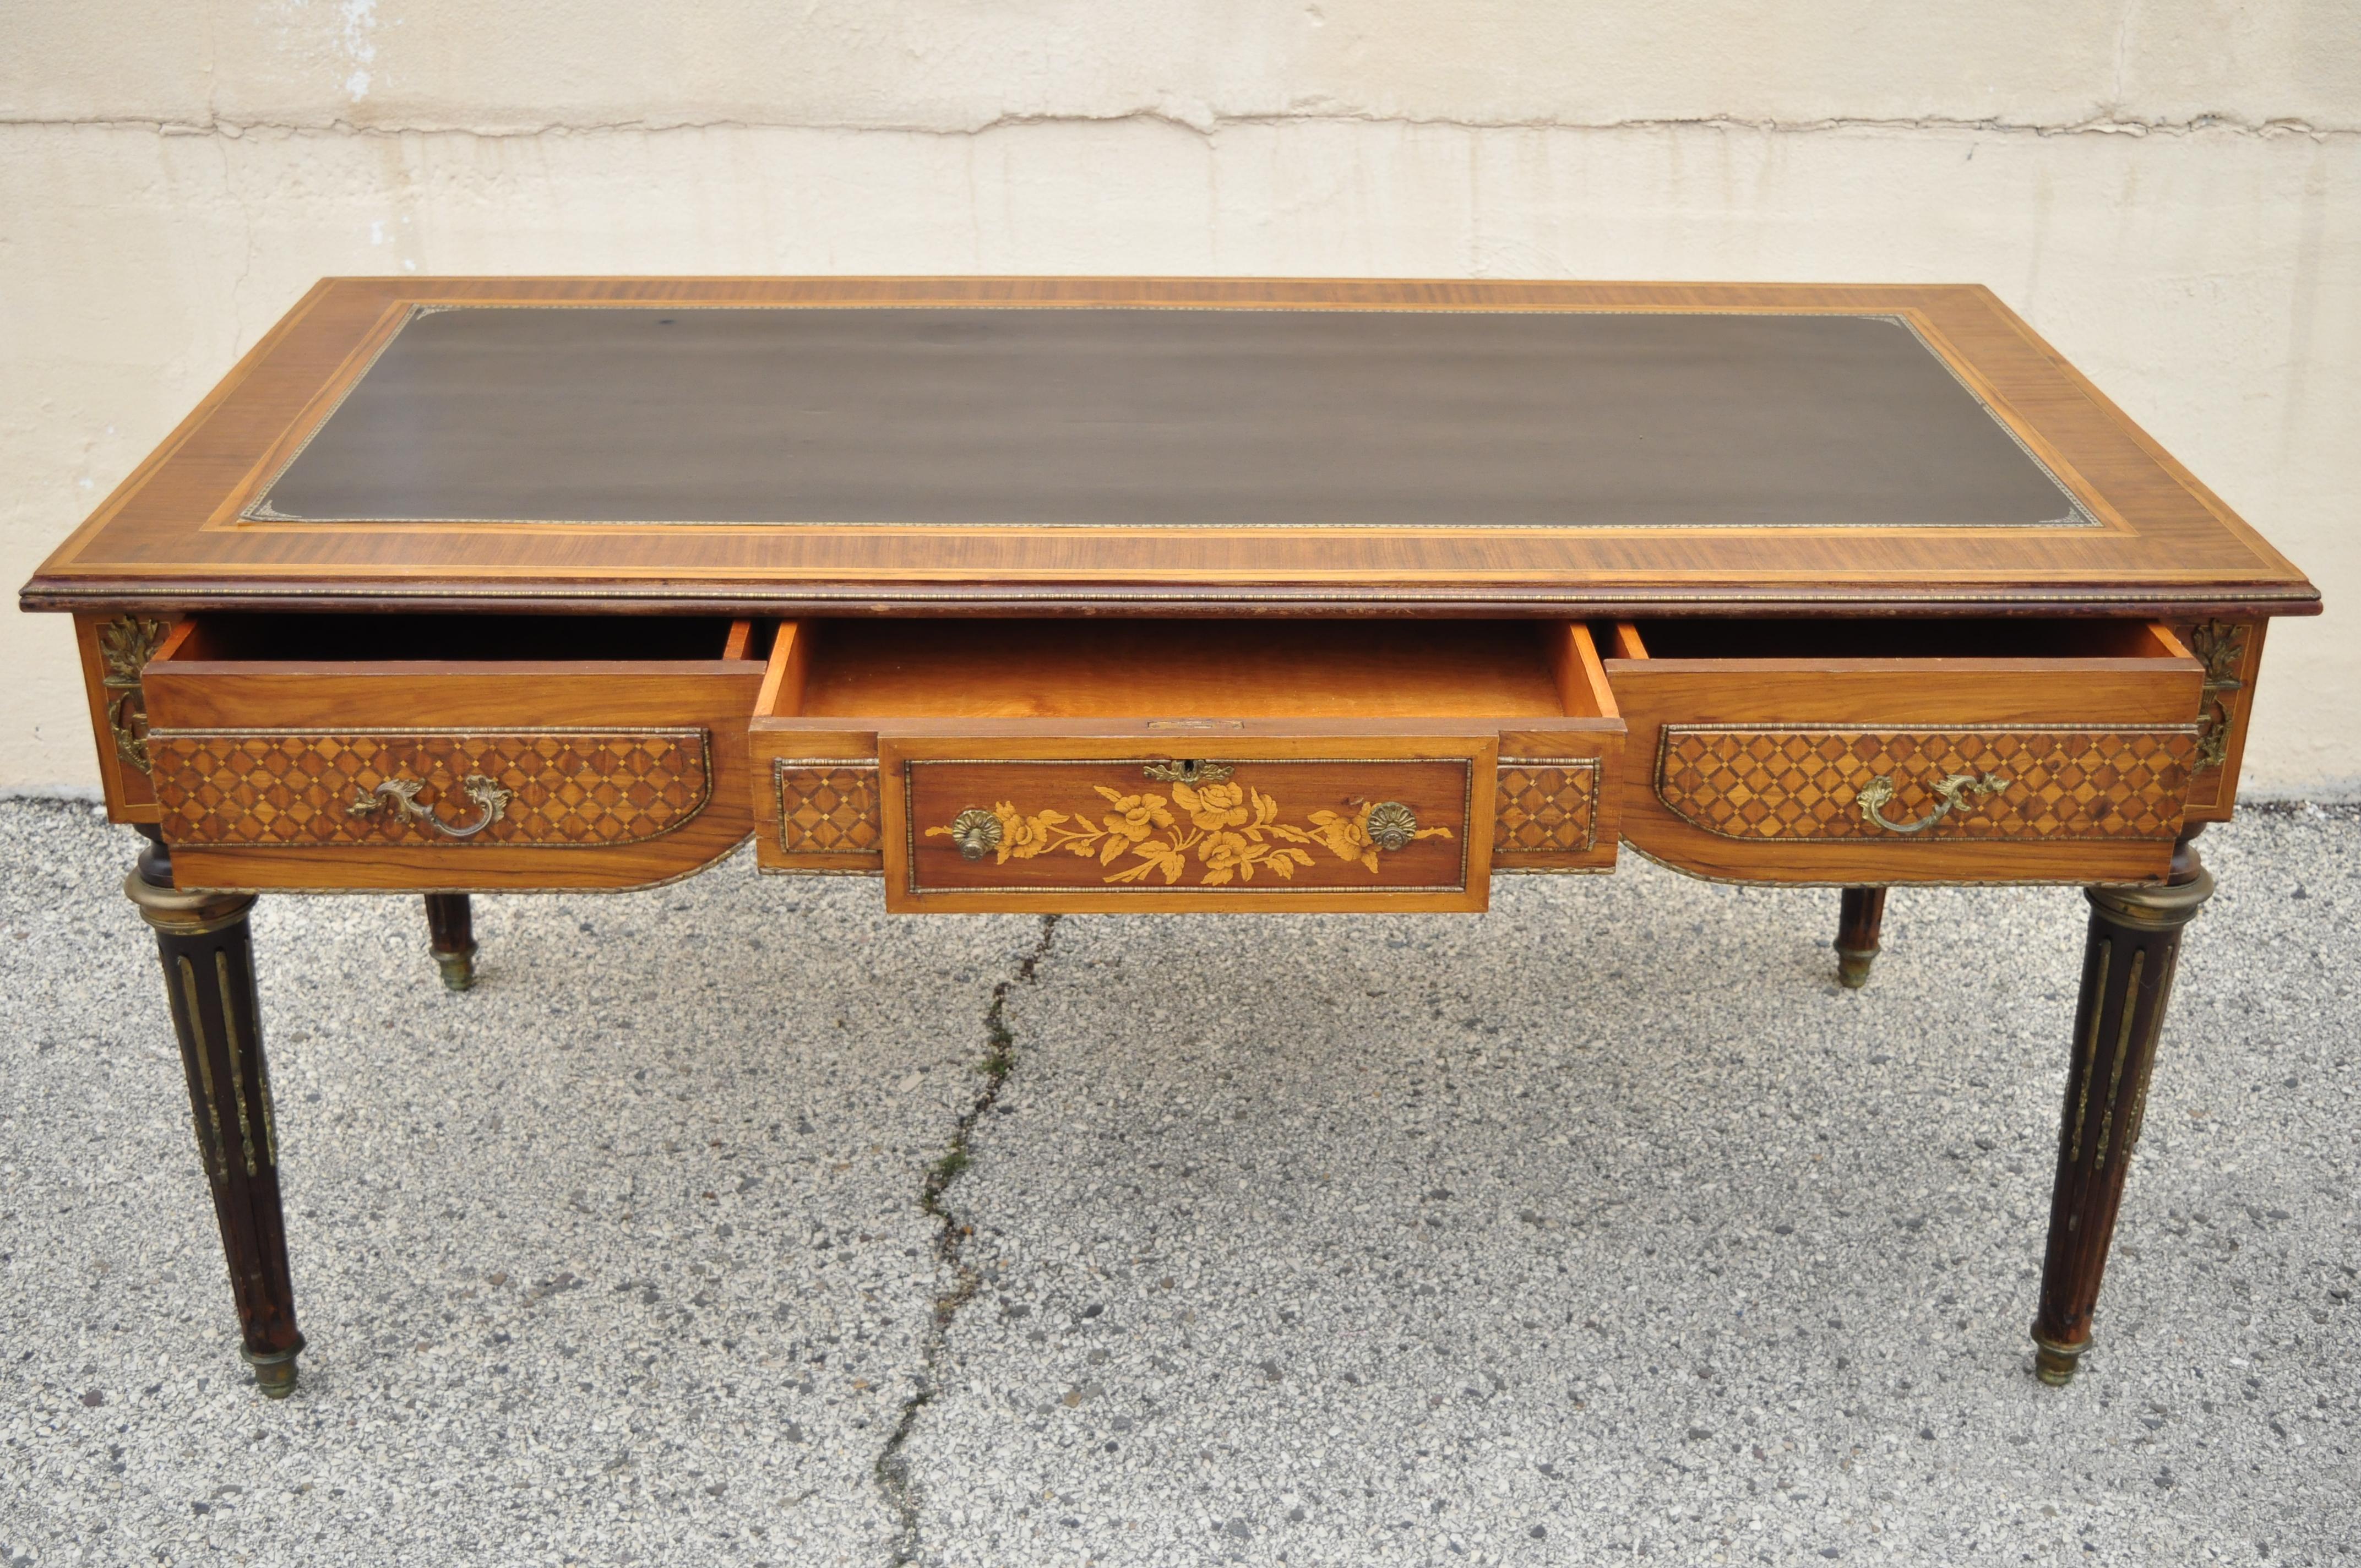 20th Century French Louis XVI Style Leather Top Bureau Plat Large Floral Inlay Executive Desk